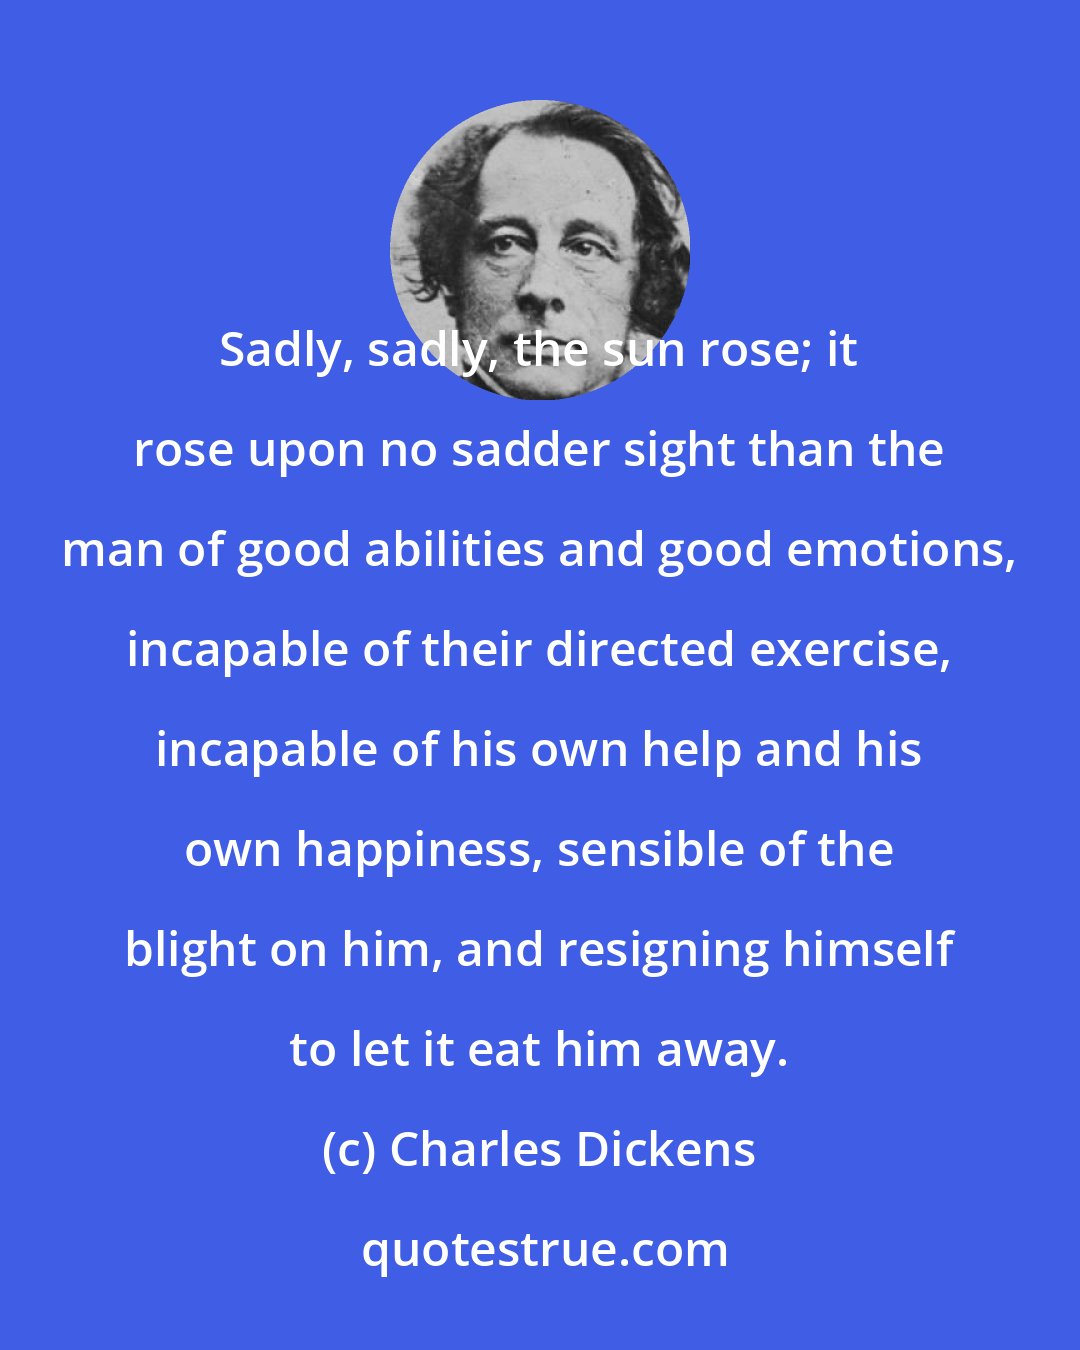 Charles Dickens: Sadly, sadly, the sun rose; it rose upon no sadder sight than the man of good abilities and good emotions, incapable of their directed exercise, incapable of his own help and his own happiness, sensible of the blight on him, and resigning himself to let it eat him away.